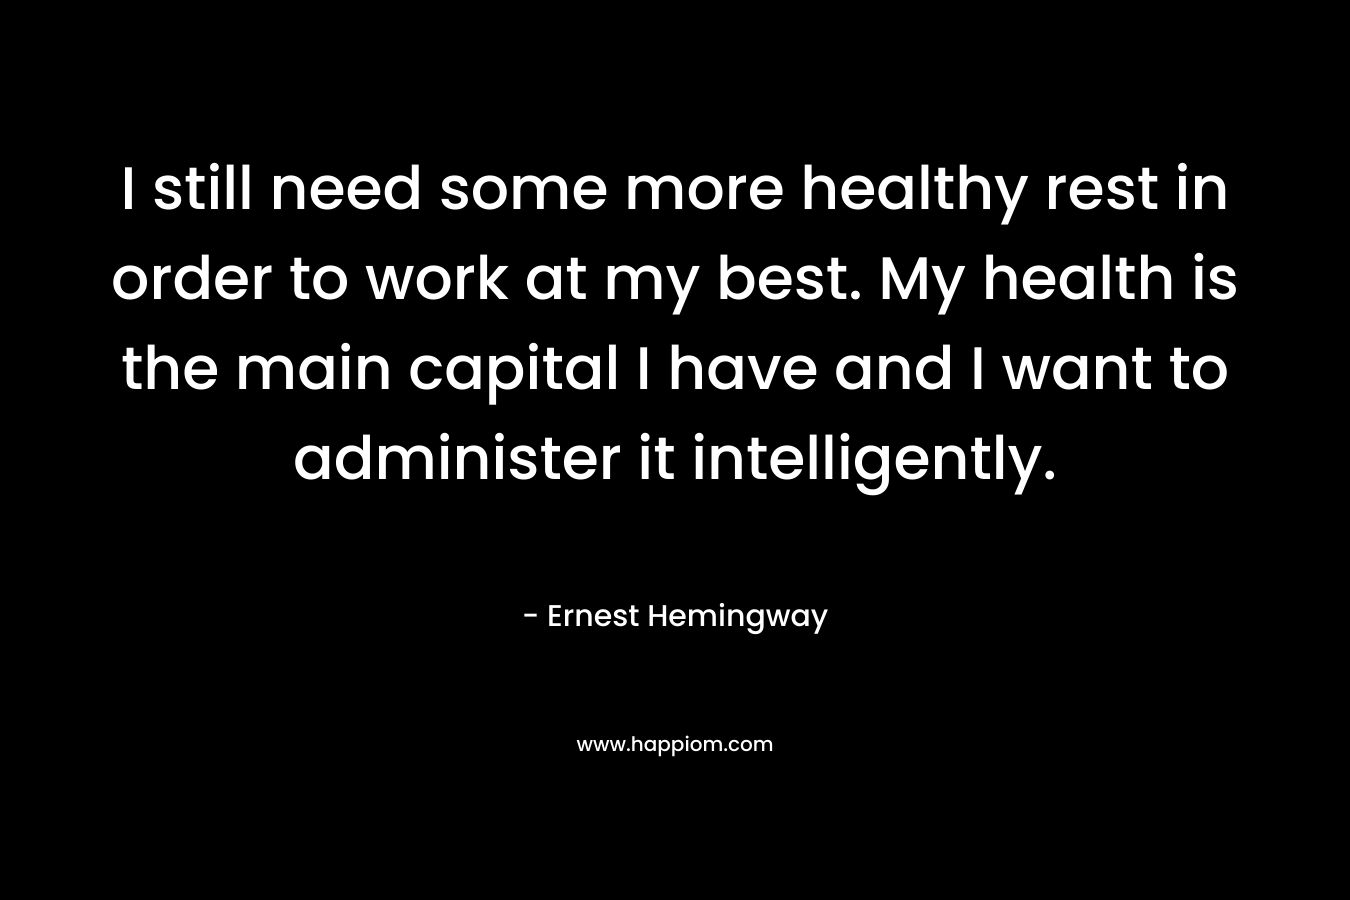 I still need some more healthy rest in order to work at my best. My health is the main capital I have and I want to administer it intelligently.